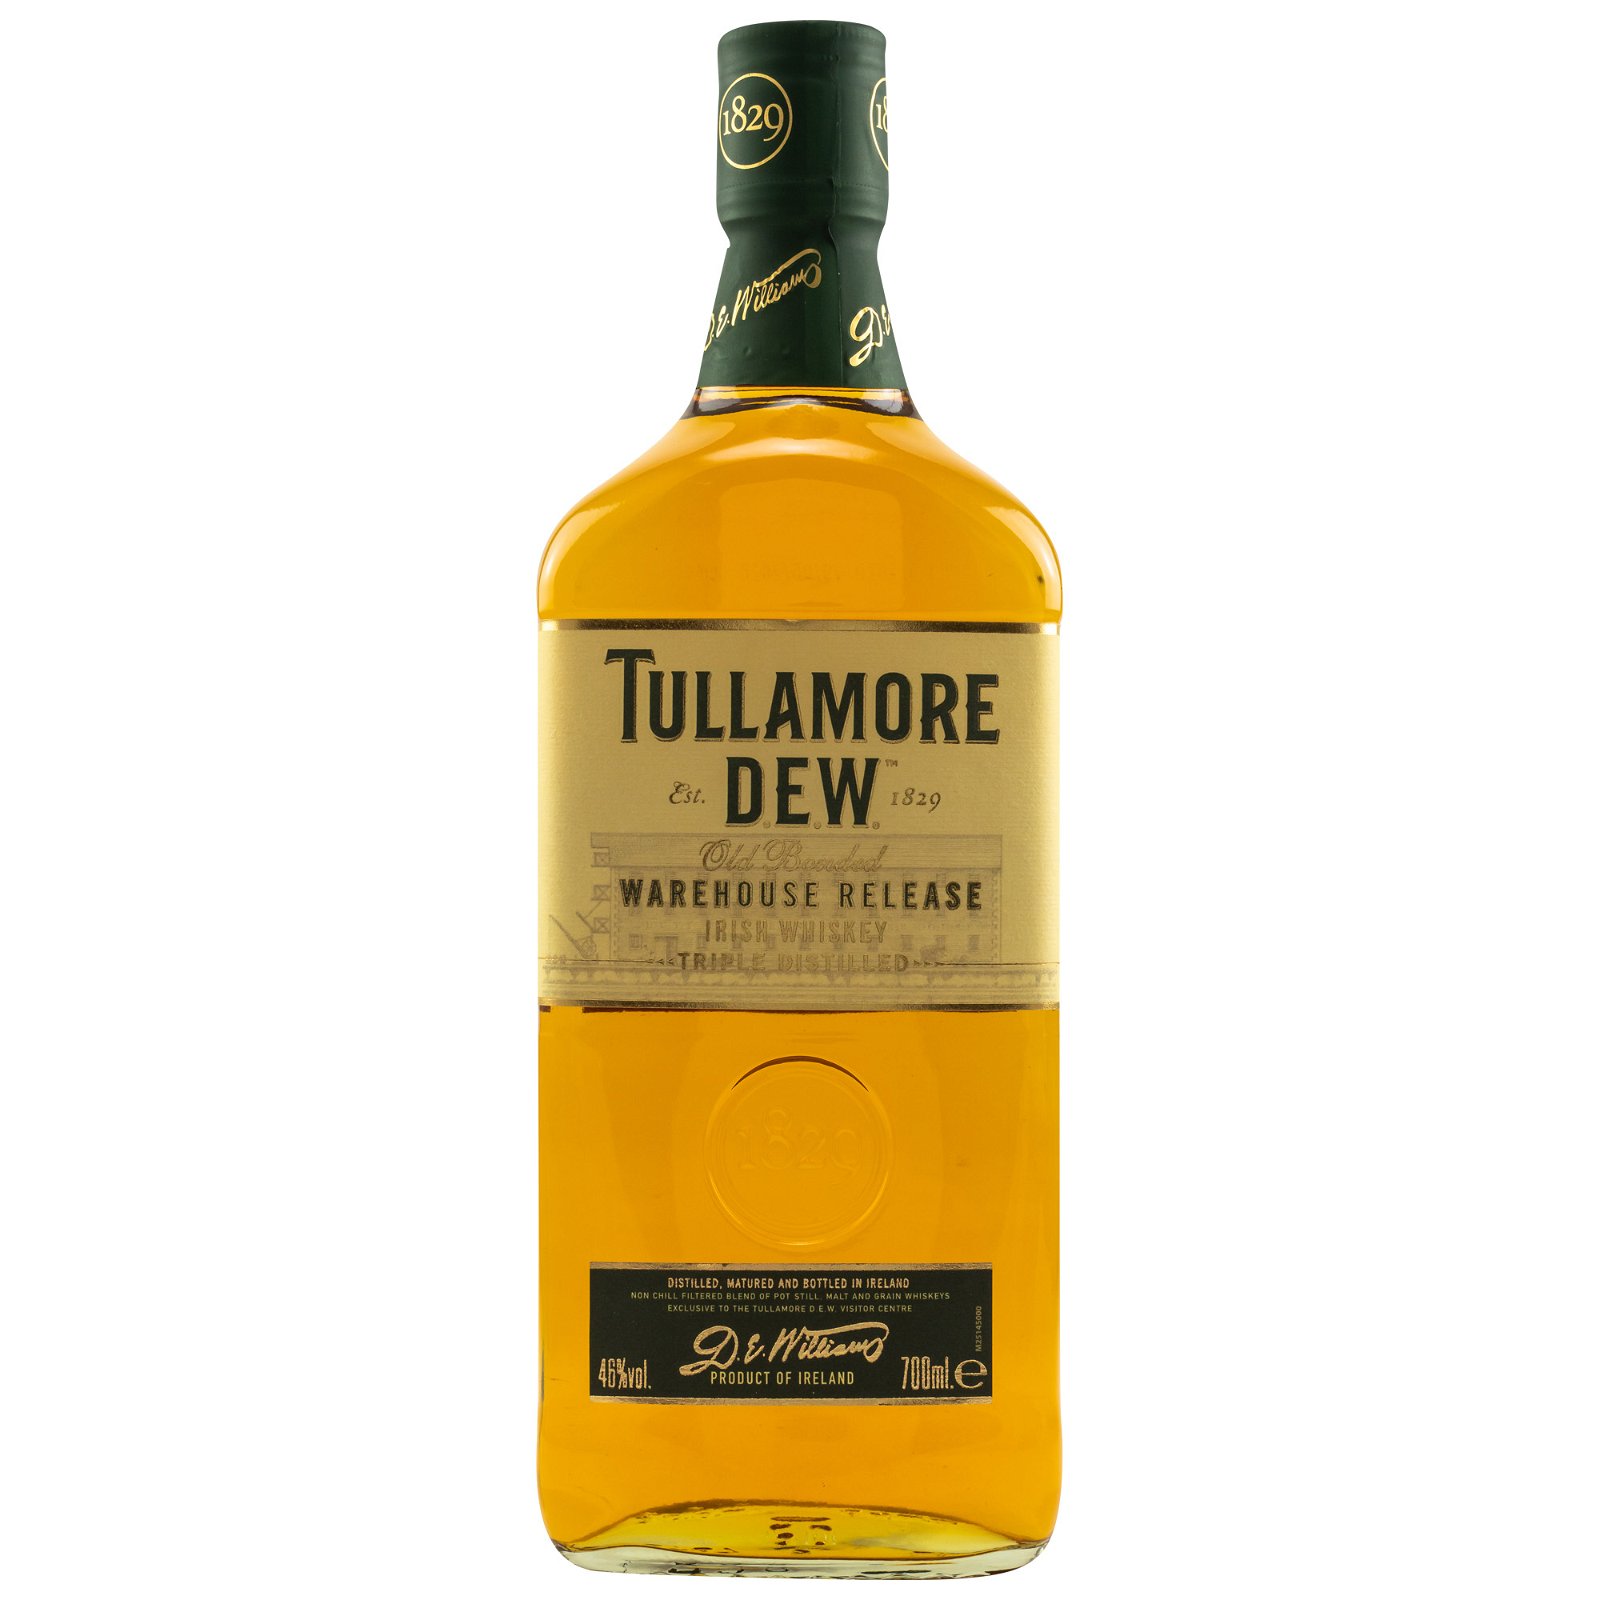 Tullamore Dew Old Bonded Warehouse Release